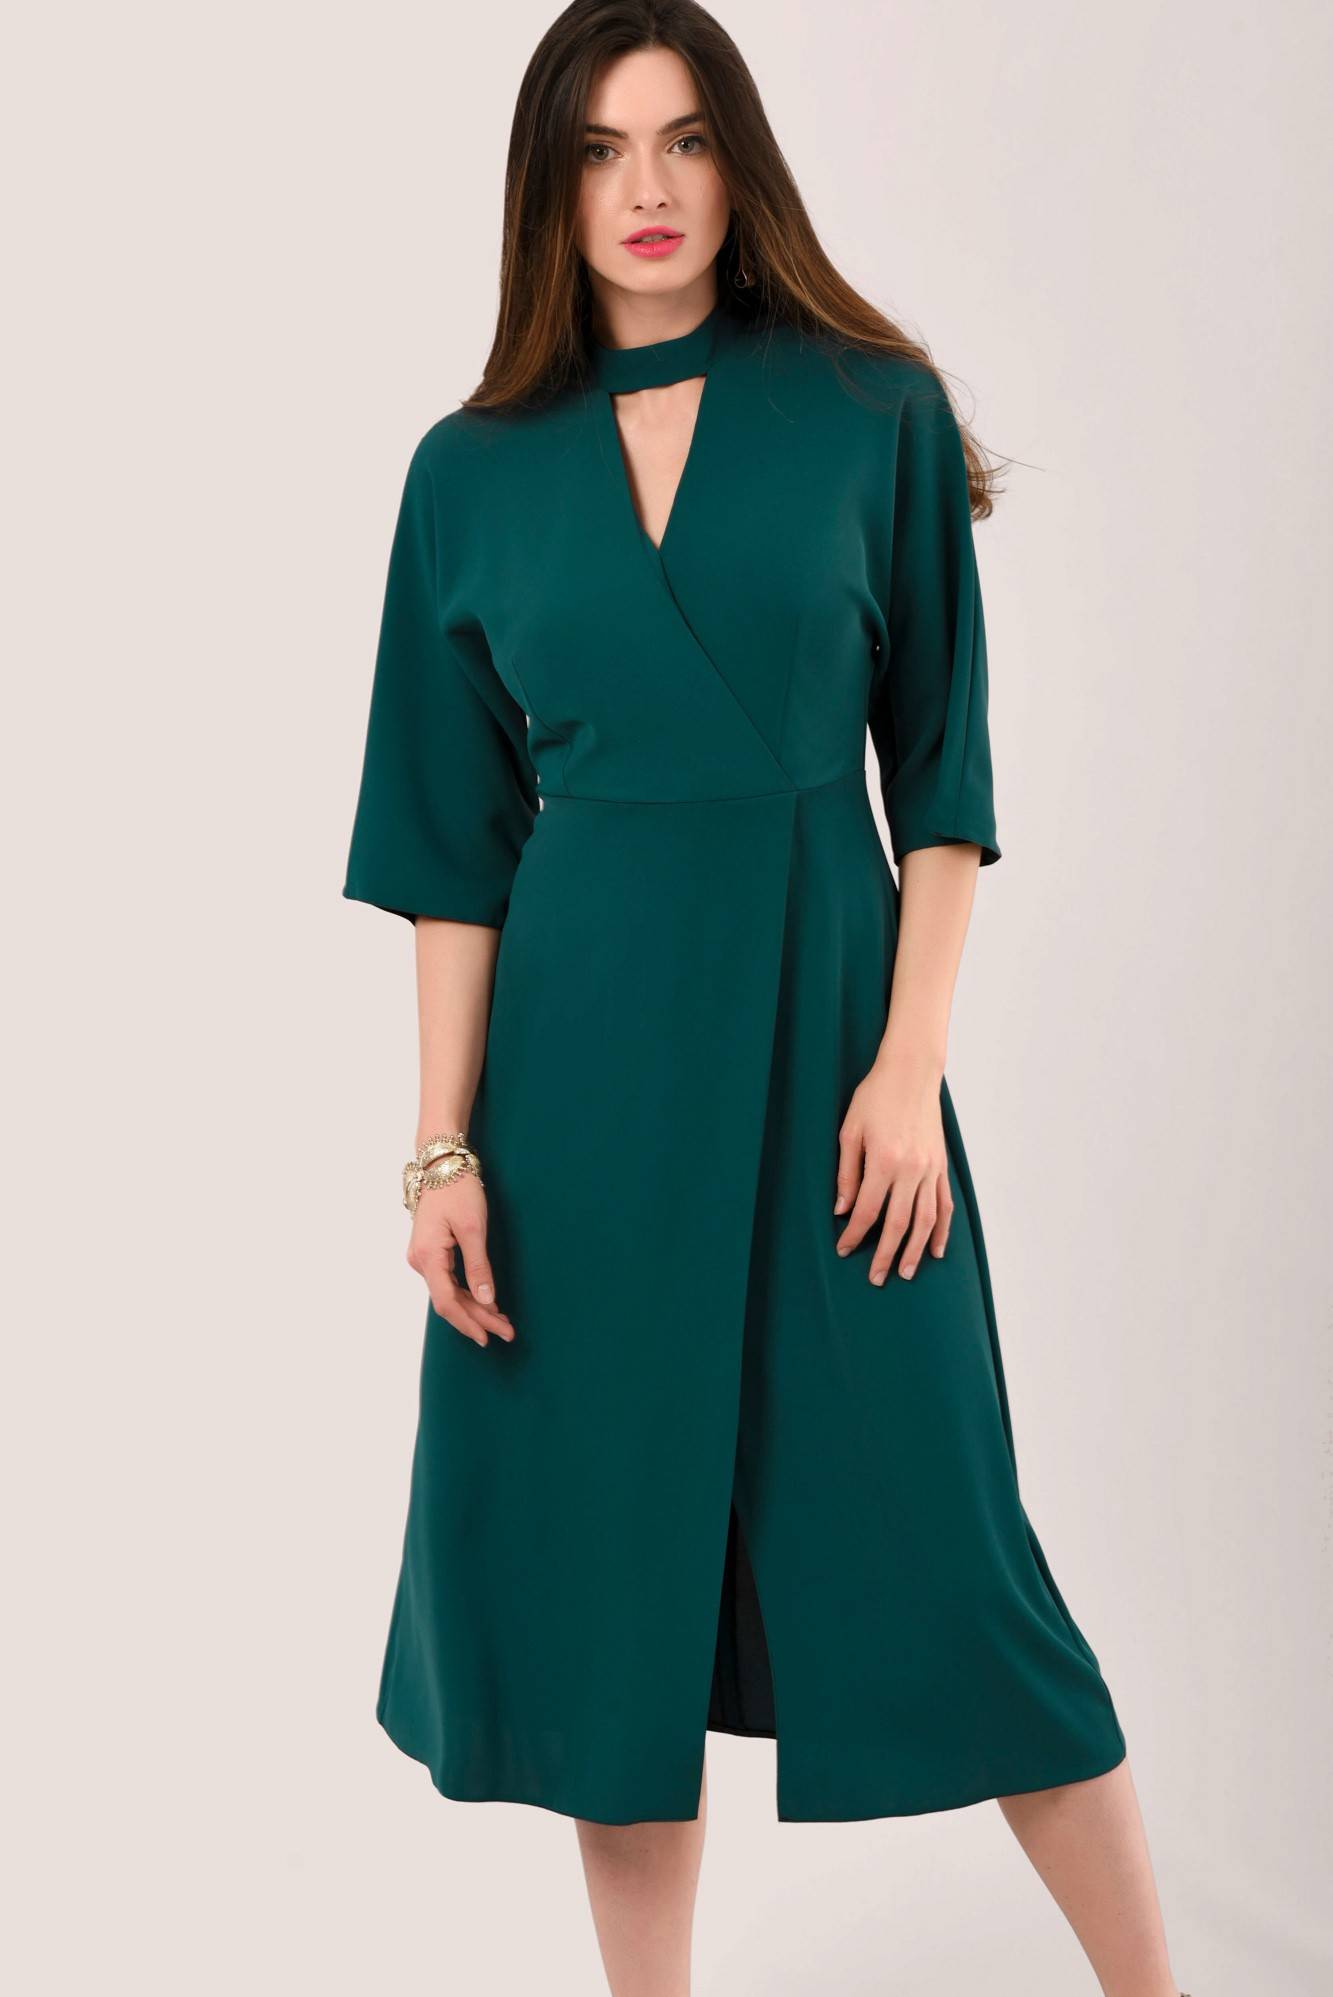 Pull out Funeral silent Rochie teal, midi, tip kimono - ROH - DR4081 - Rochii